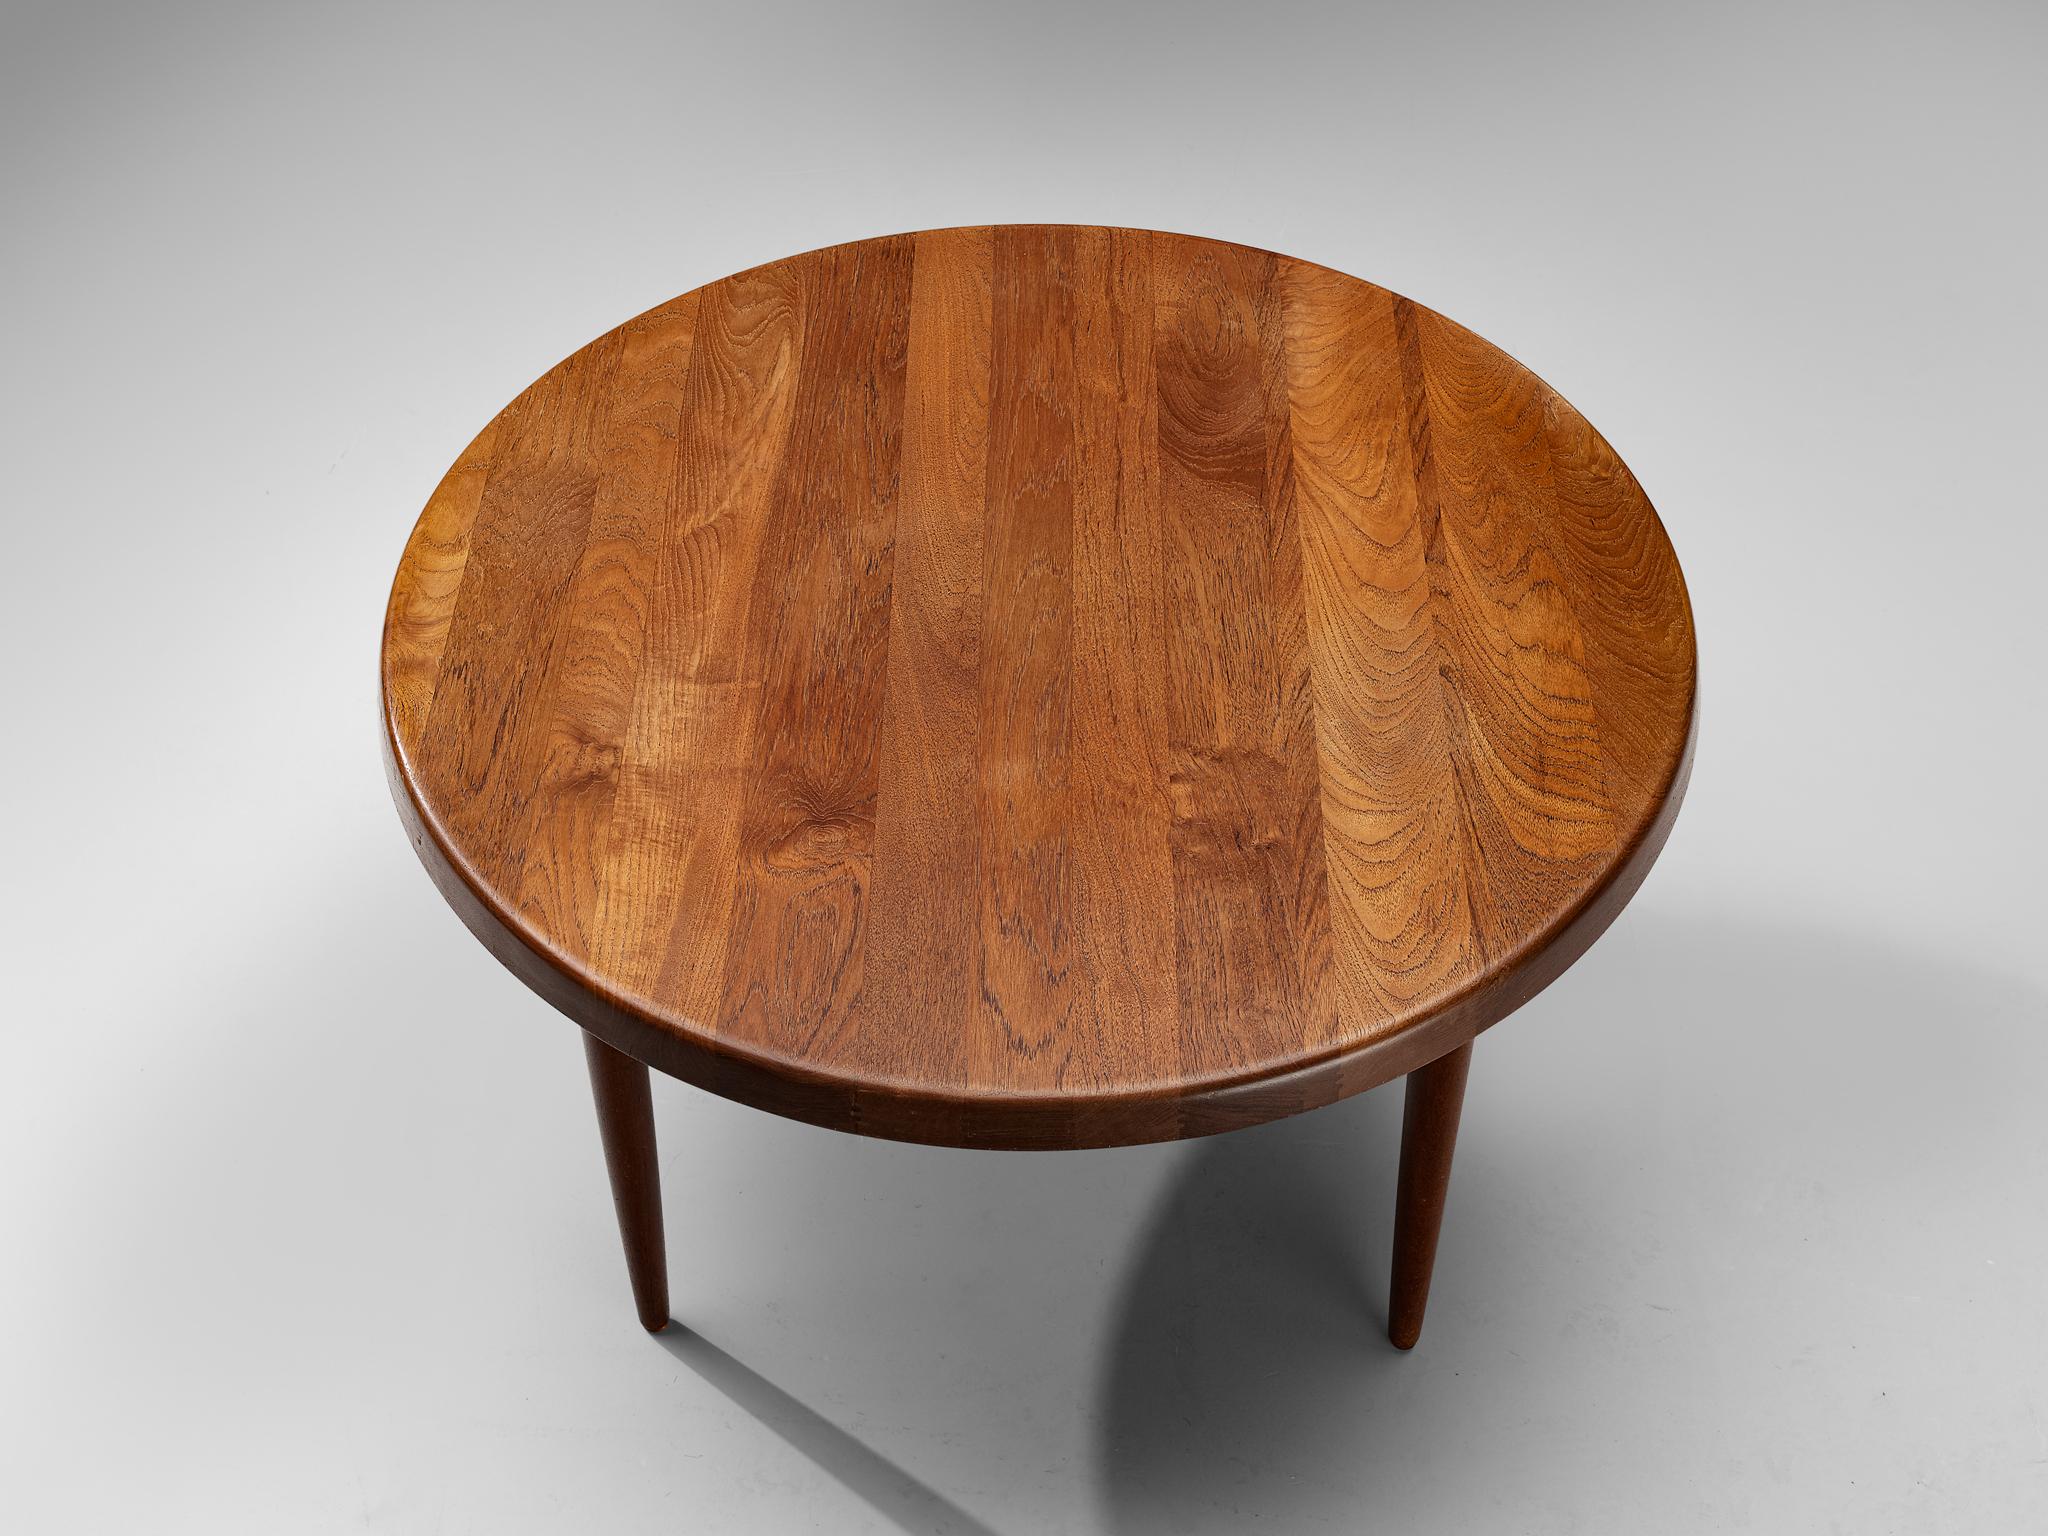 Coffee table, teak, Denmark, 1960s

Danish coffee table in with a warm teak table top. The table top has soft and rounded edges and smooth tapered legs. Due to its simpel yet elegant design without any kind of decorative details the focus falls on